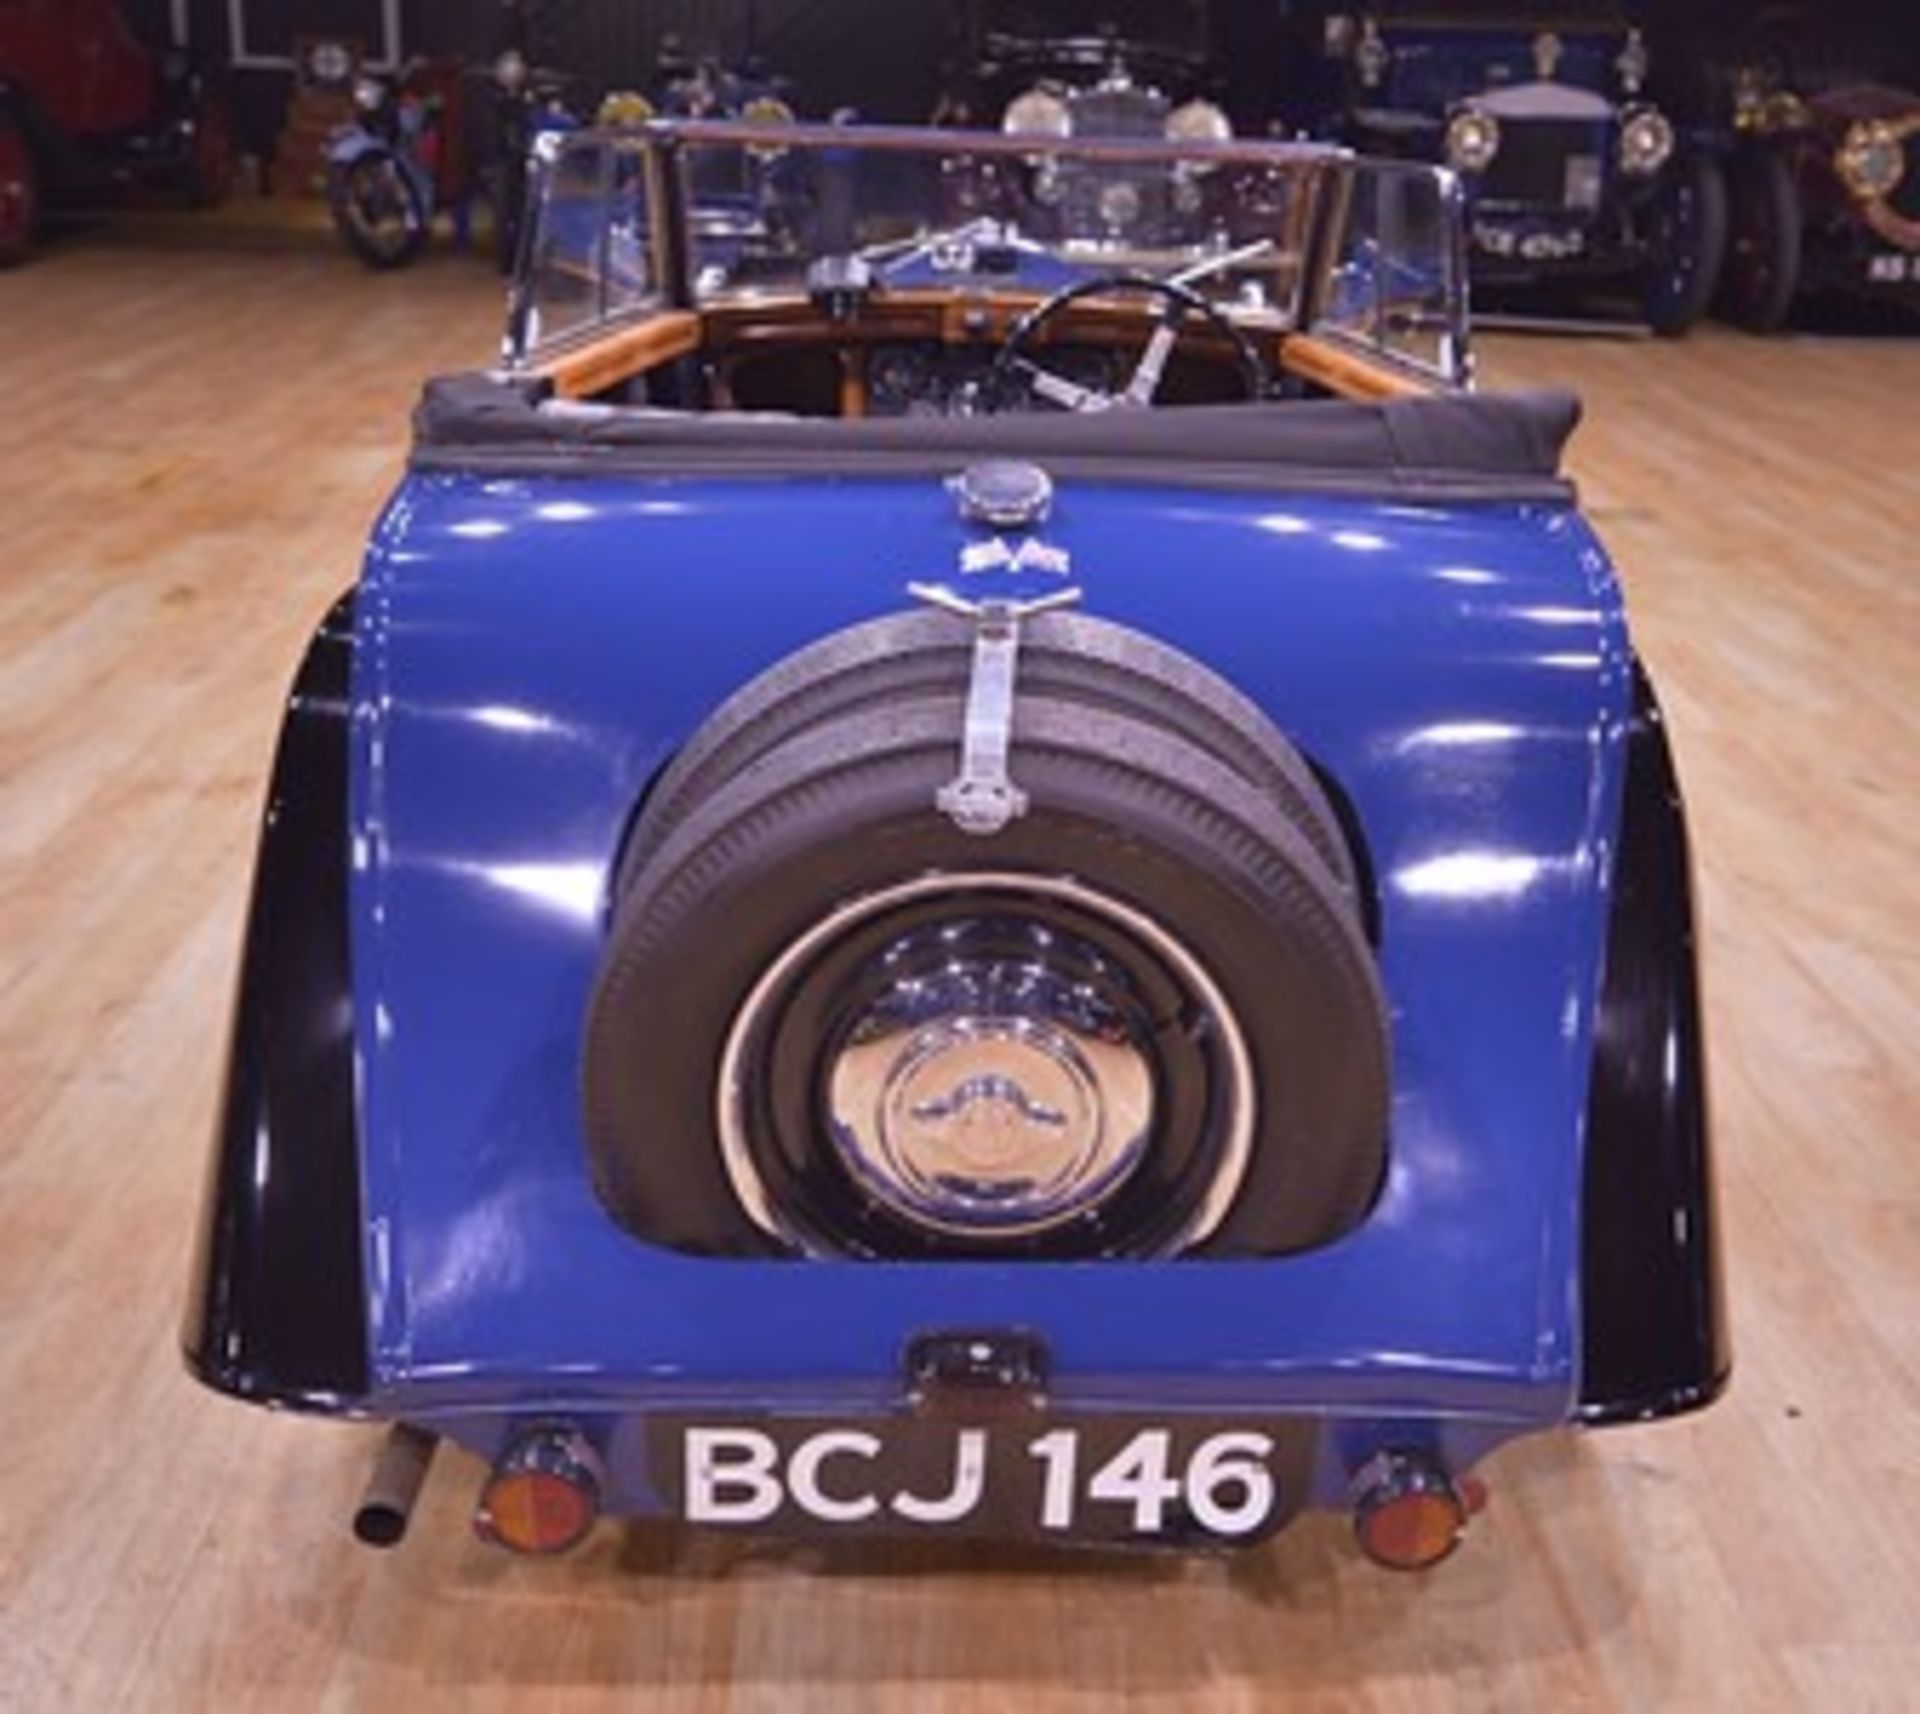 1938 4/4 Morgan Drop Head Coupe Flat Rad
The Drop head Coupe was considered to be the most - Image 6 of 11